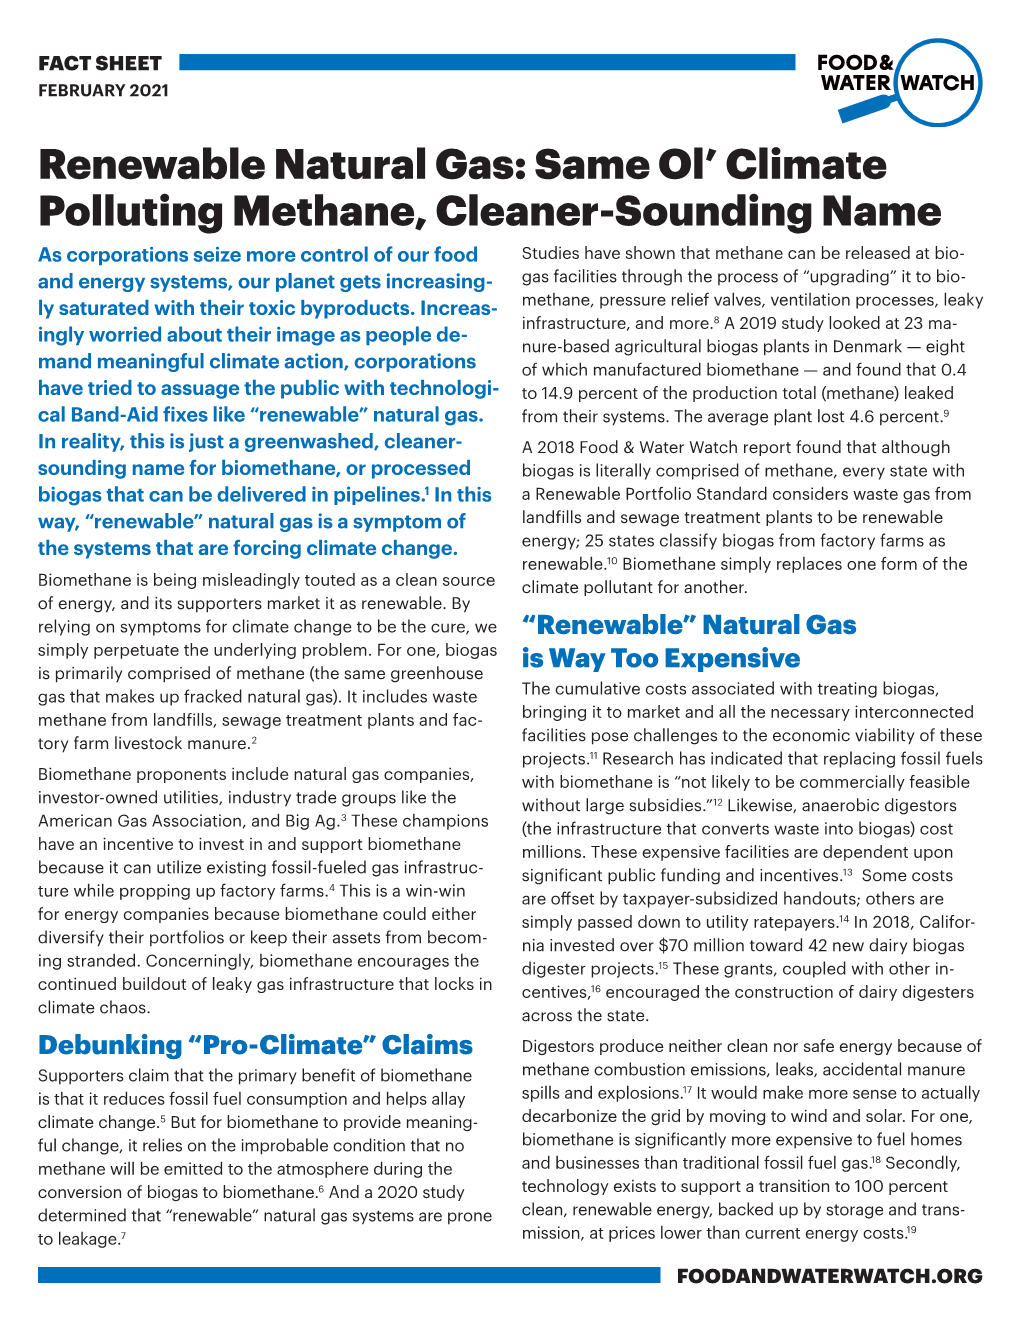 Renewable Natural Gas: Same Ol' Climate Polluting Methane, Cleaner